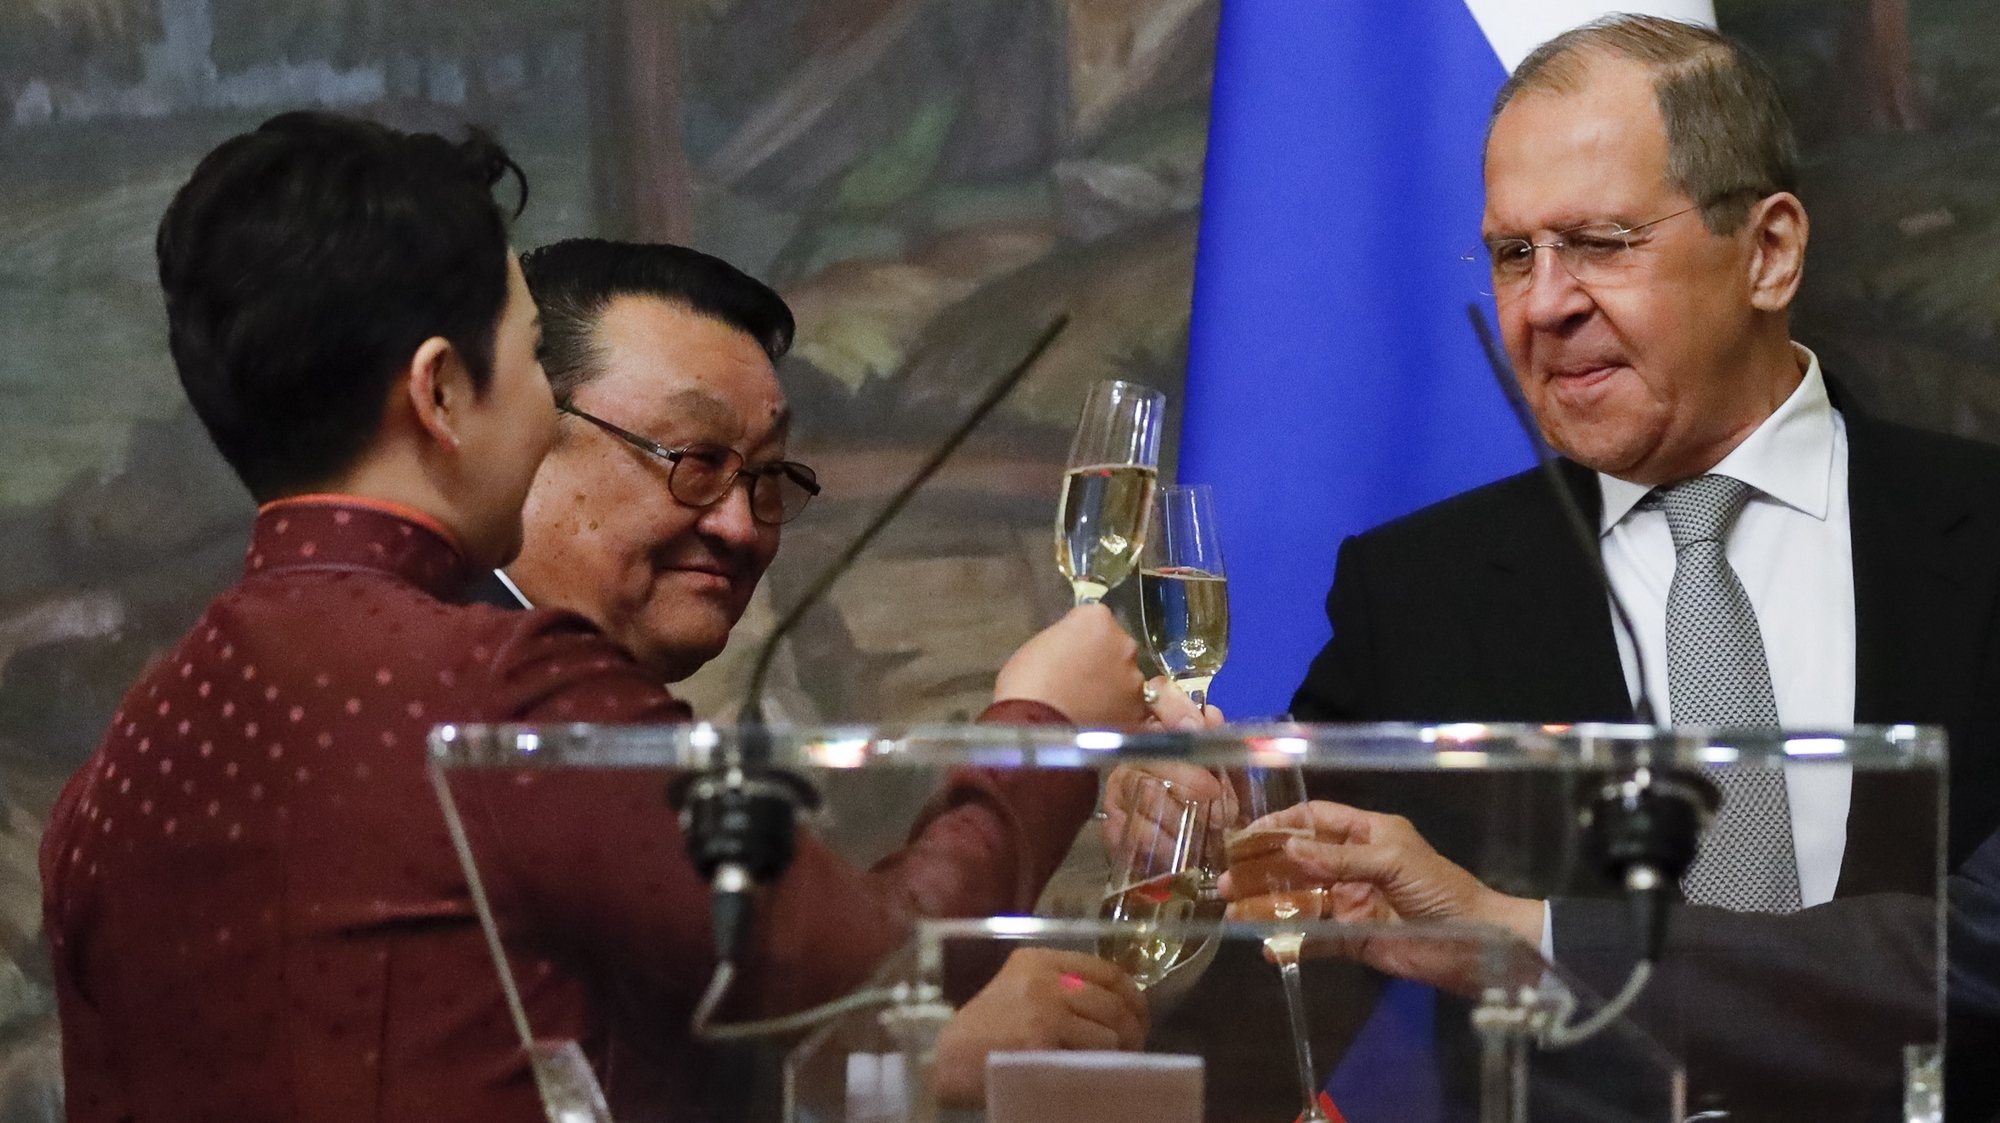 epa09240928 Russian Foreign Minister Sergey Lavrov (R)  toasts with Mongolian cosmonaut Jugderdemidiin Gurragchaa (C) and Mongolian Foreign Minister Battsetseg Batmunkh (L) after awarding ceremony in Moscow, Russia, 01 June 2021. Mongolian Foreign Minister is on a working visit to Russia.  EPA/ALEXANDER ZEMLIANICHENKO/POOL